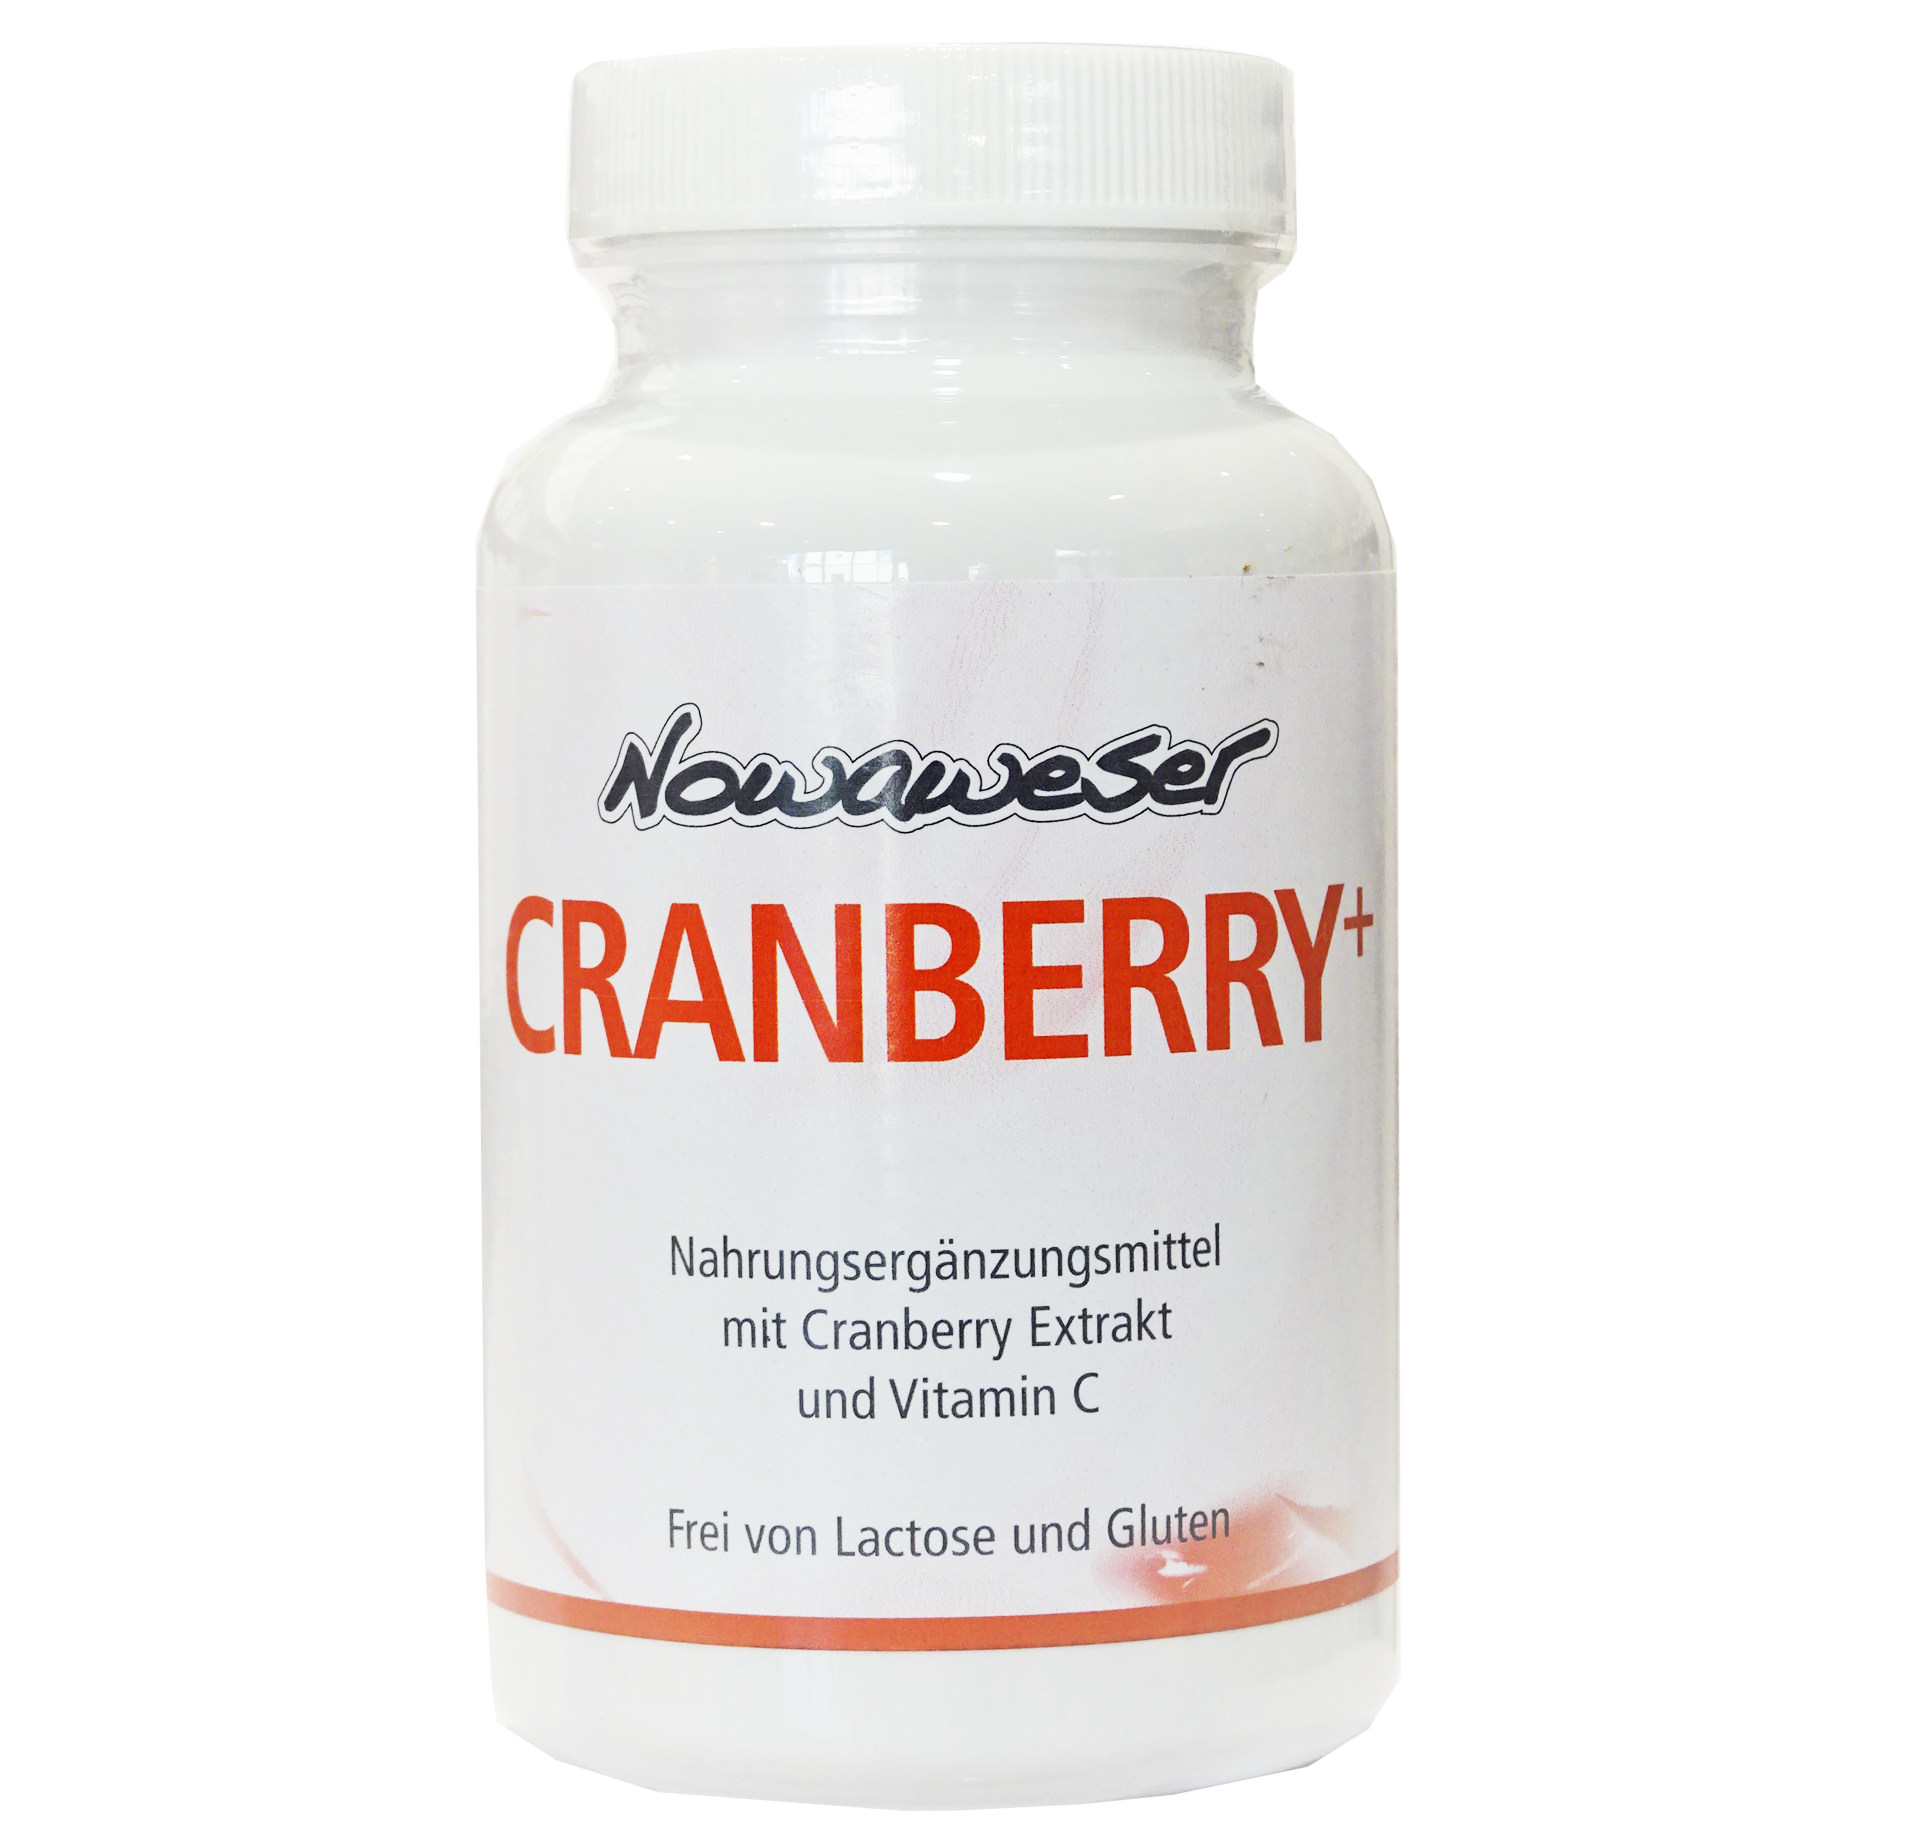 Nowaweser Cranberry +